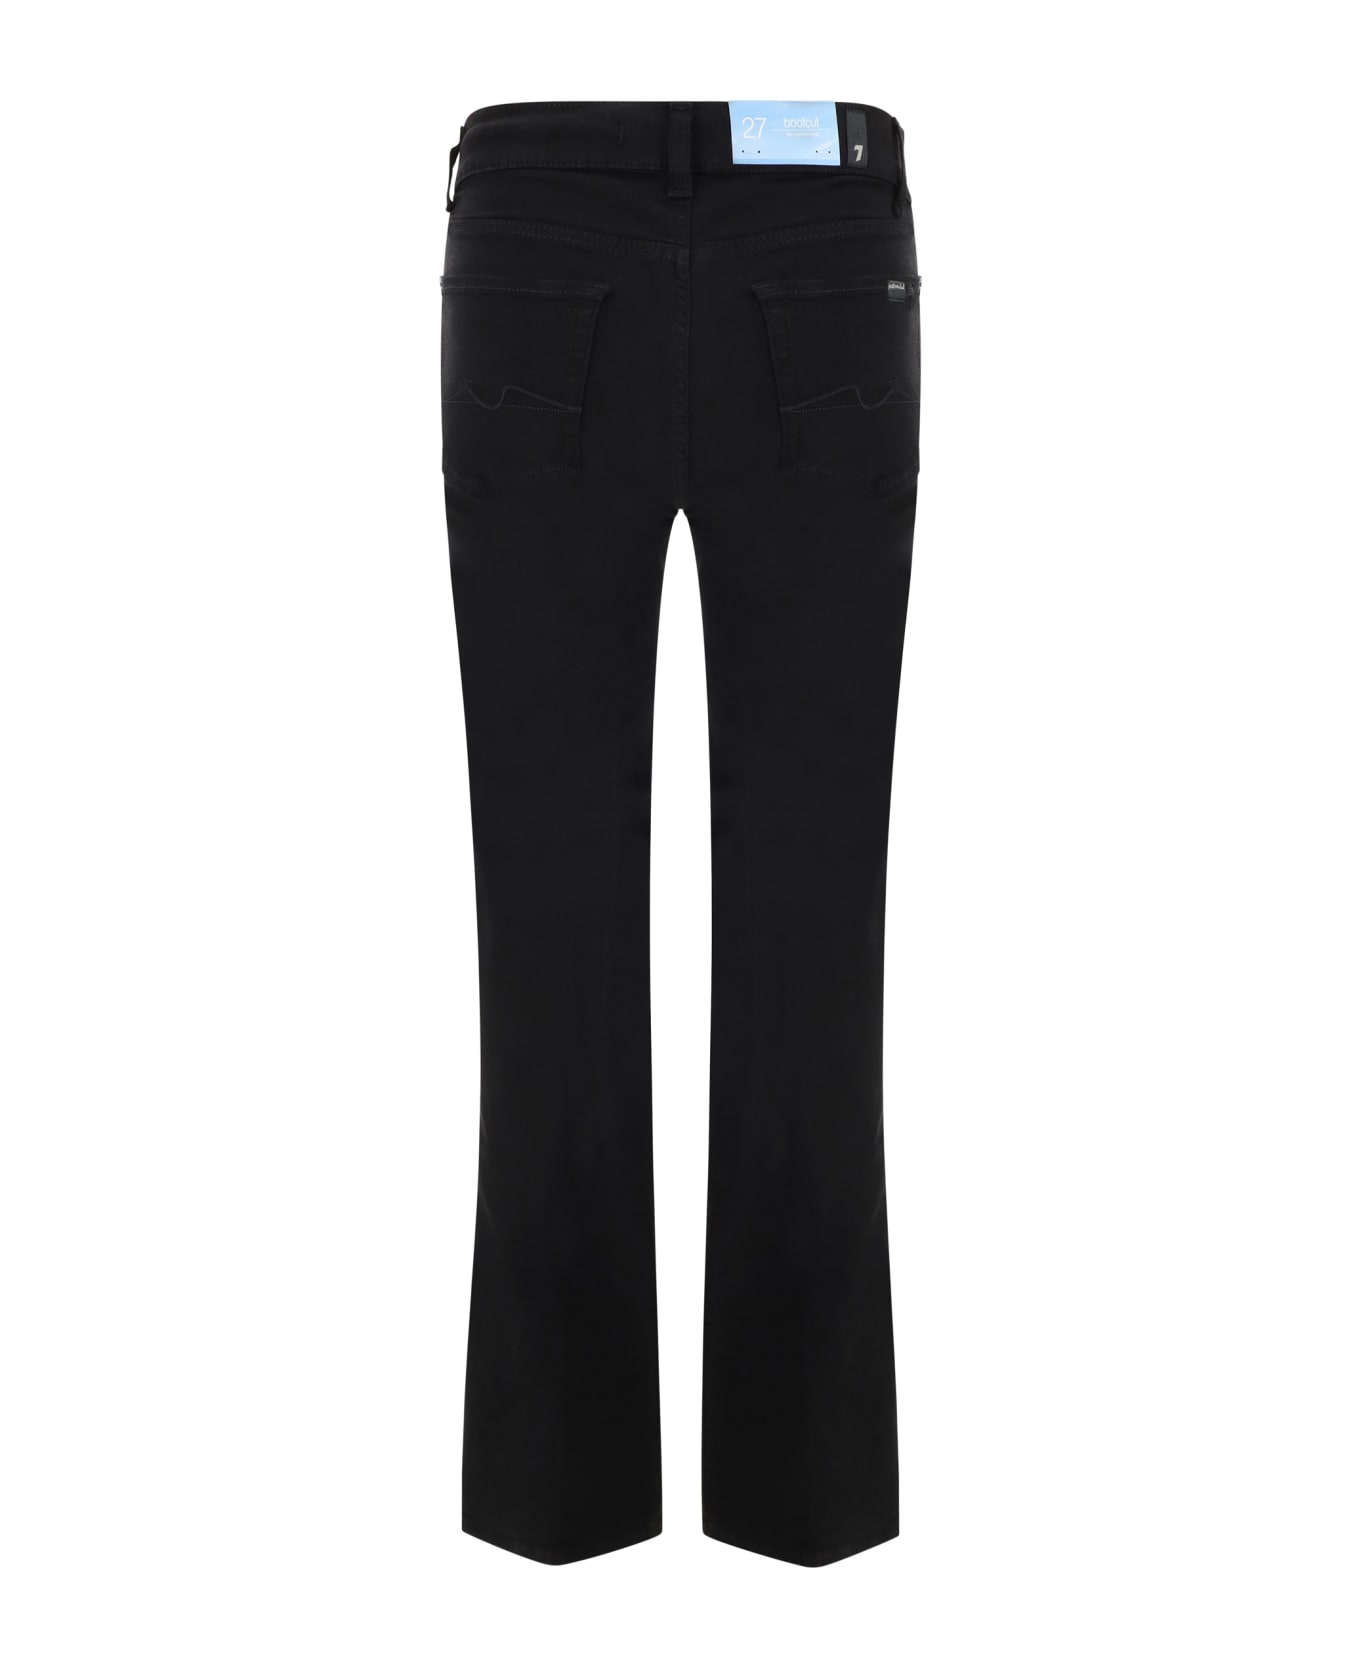 7 For All Mankind Bootcut Jeans - Black